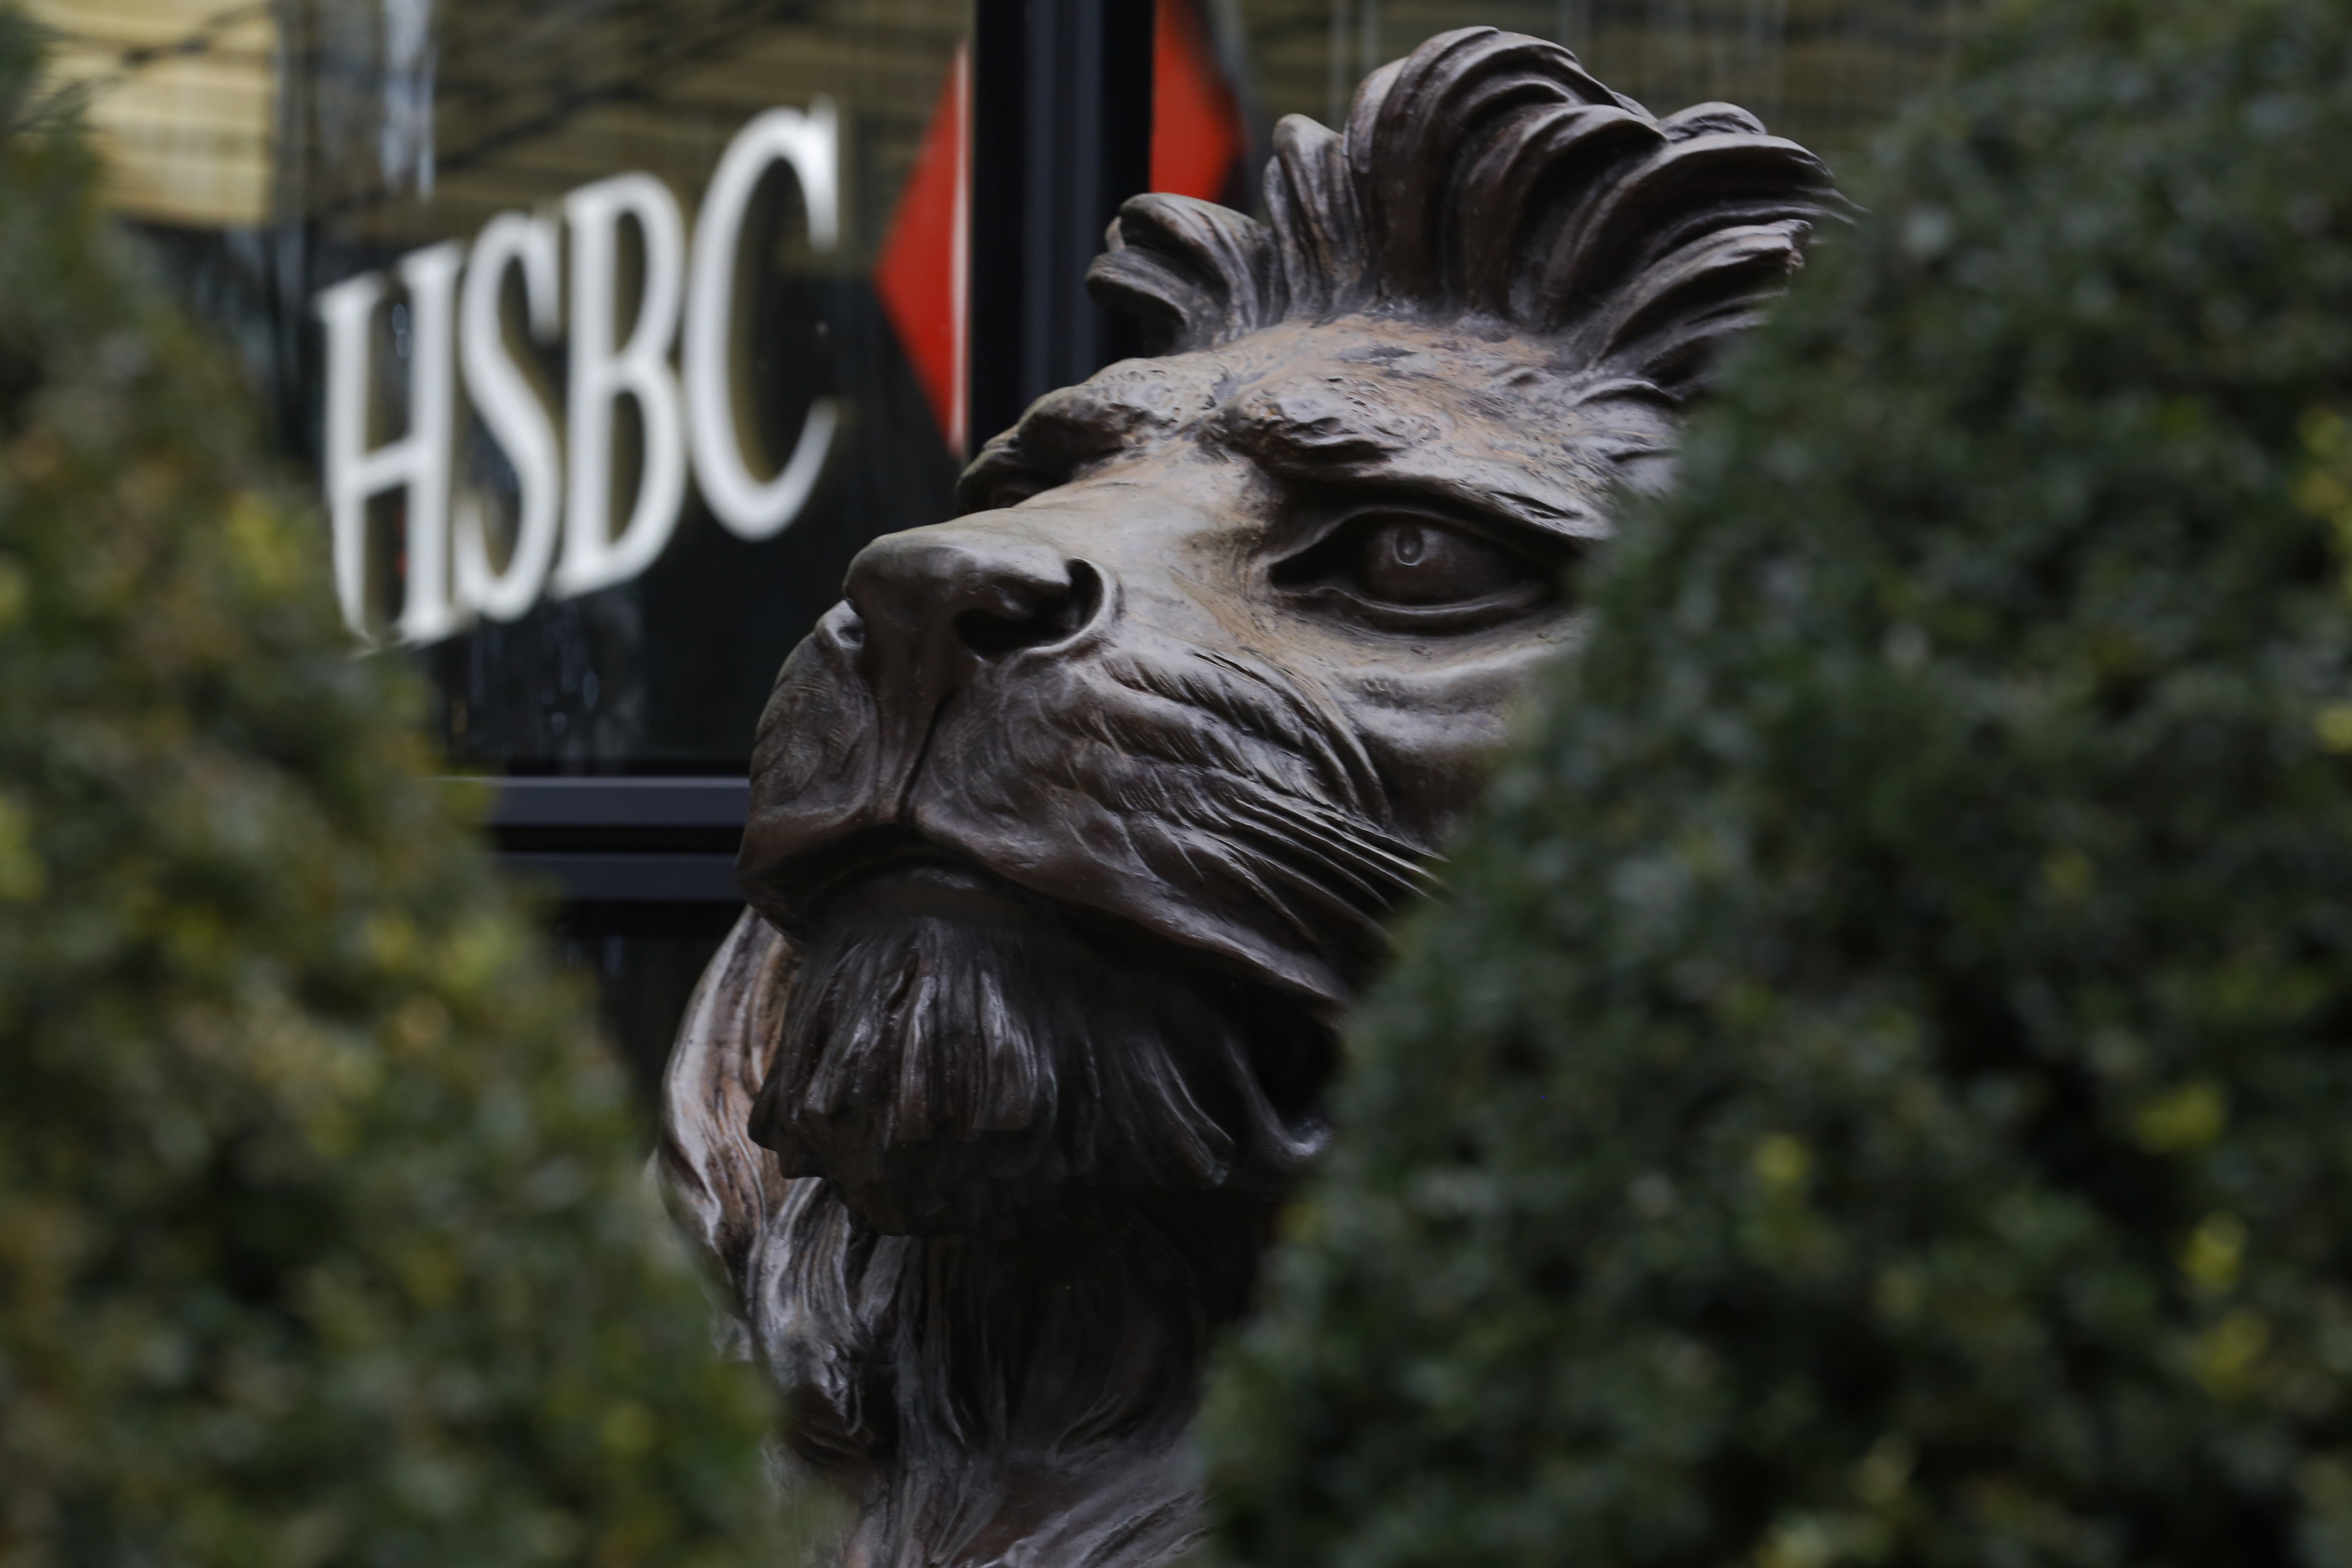 A sculpture of a lion, seen through hedges, sits outside the main entrance to the HSBC Holdings Plc headquarters in the Canary Wharf business, financial and shopping district in London, U.K., on Saturday, Feb. 13, 2016. HSBC's board will meet on Sunday to decide whether to shift its headquarters from London, according to two people with knowledge of the decision. Photographer: Luke MacGregor/Bloomberg